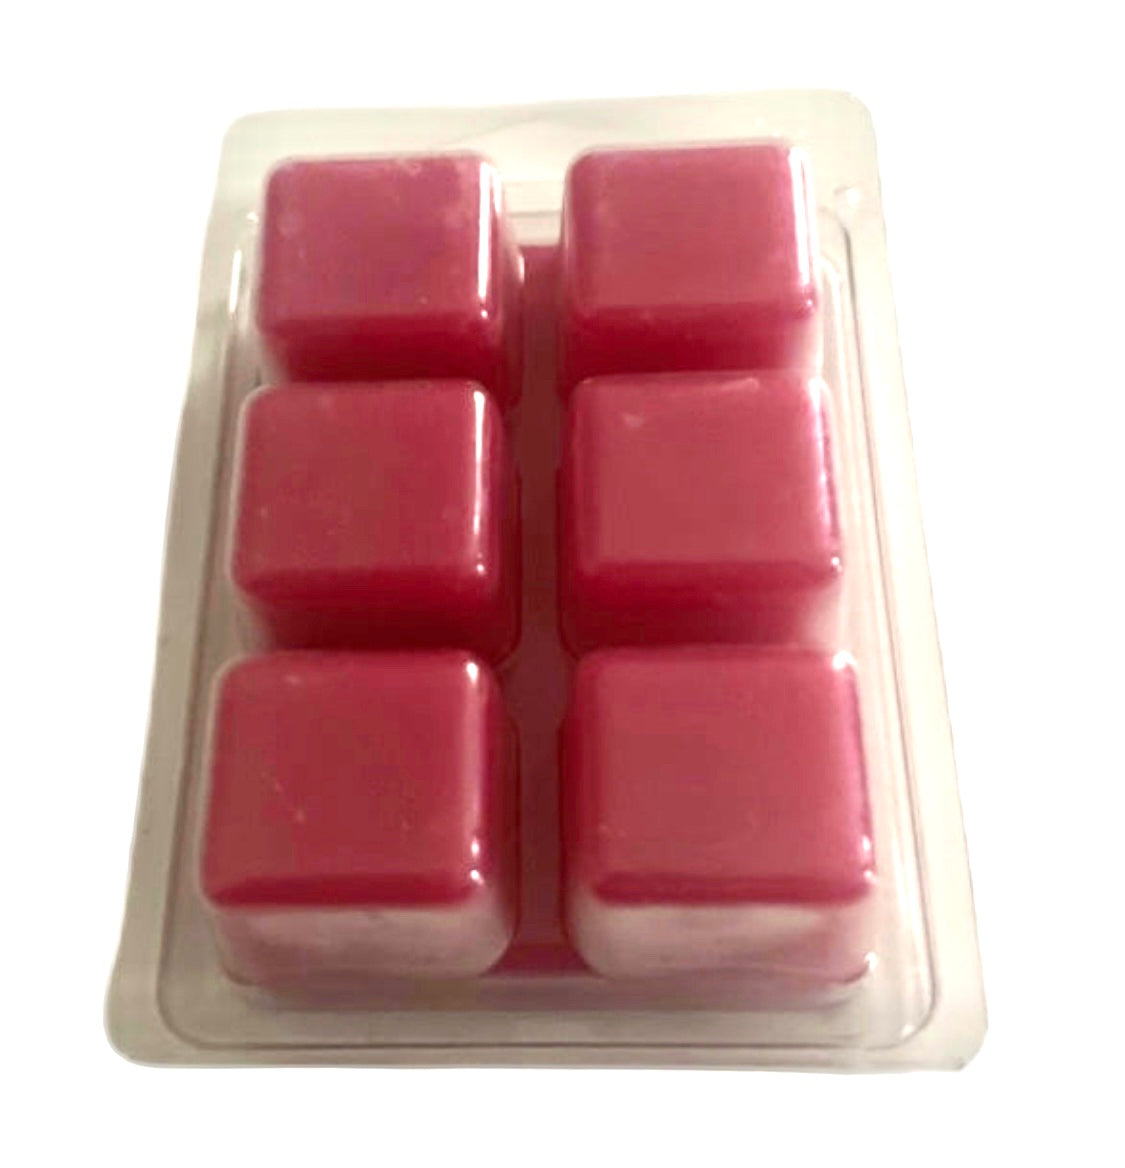 Candy Cane Ice Cream Scented Wax Melts, ScentSationals, 2.5 oz (1-Pack) 